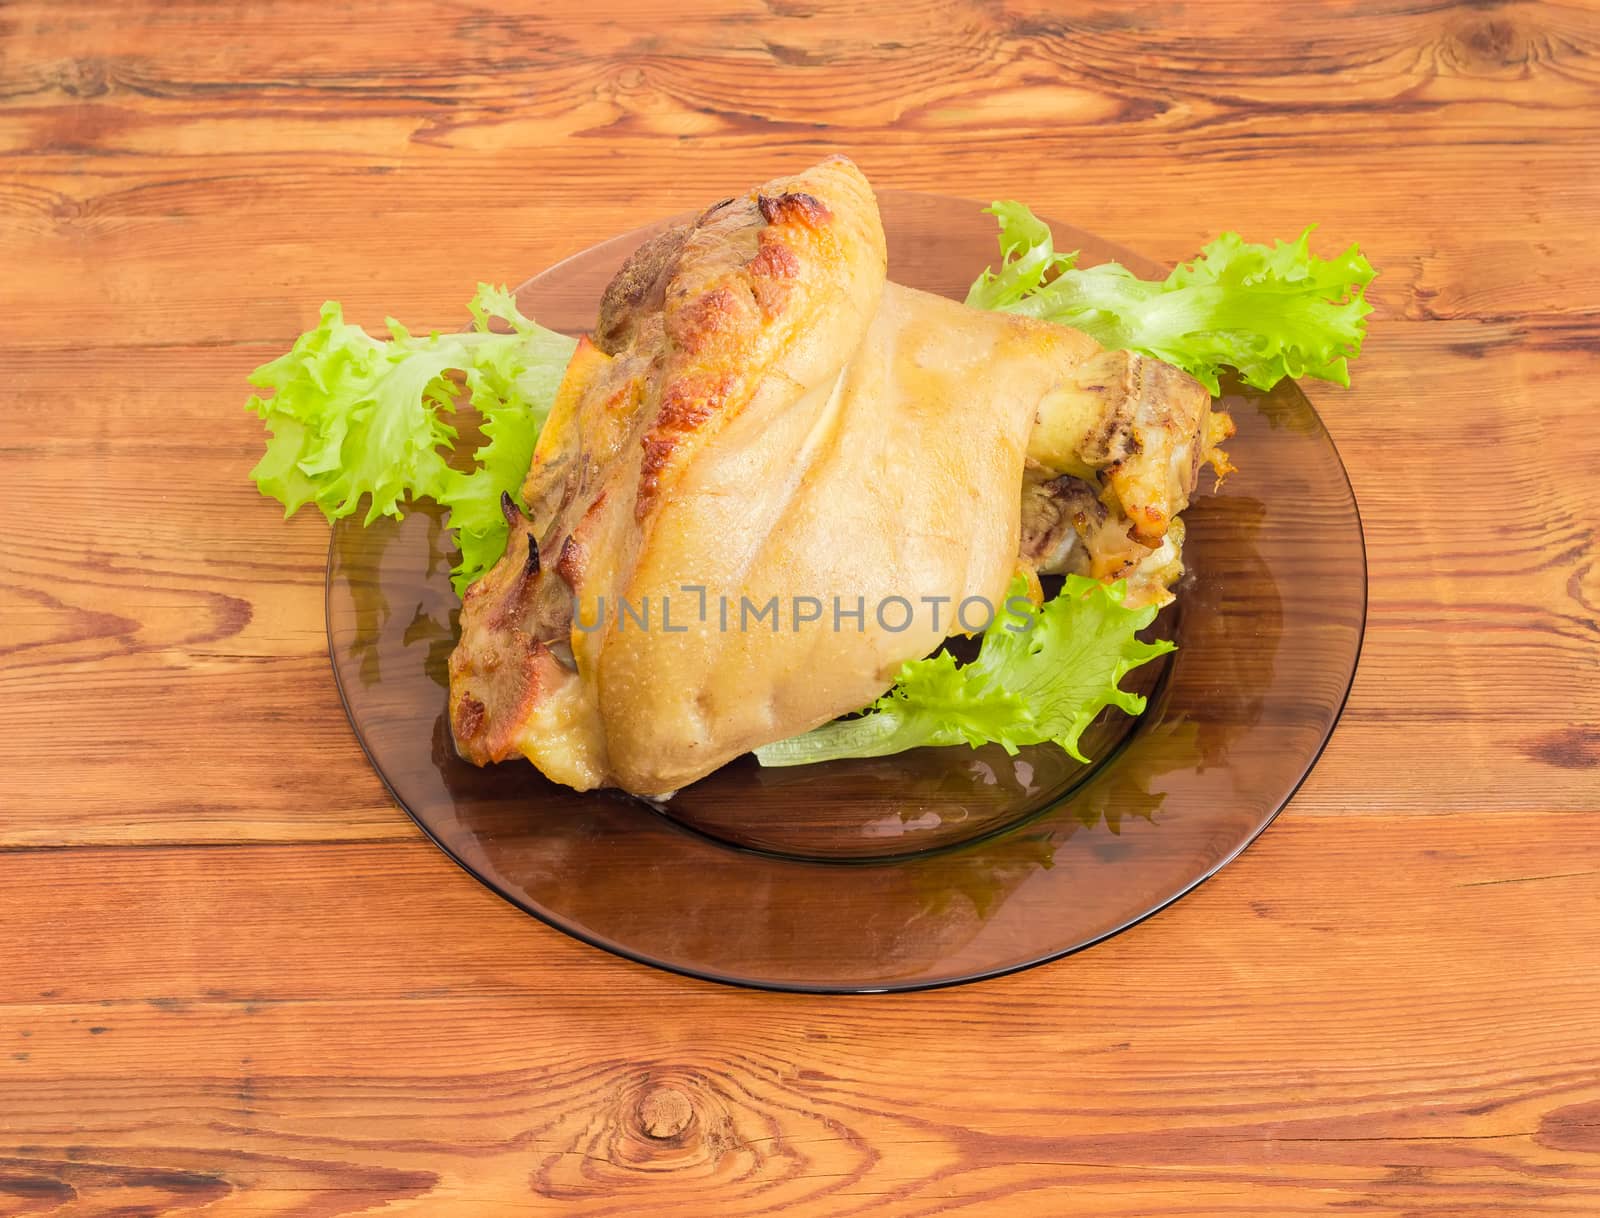 Baked ham hock on glass dish on wooden surface by anmbph